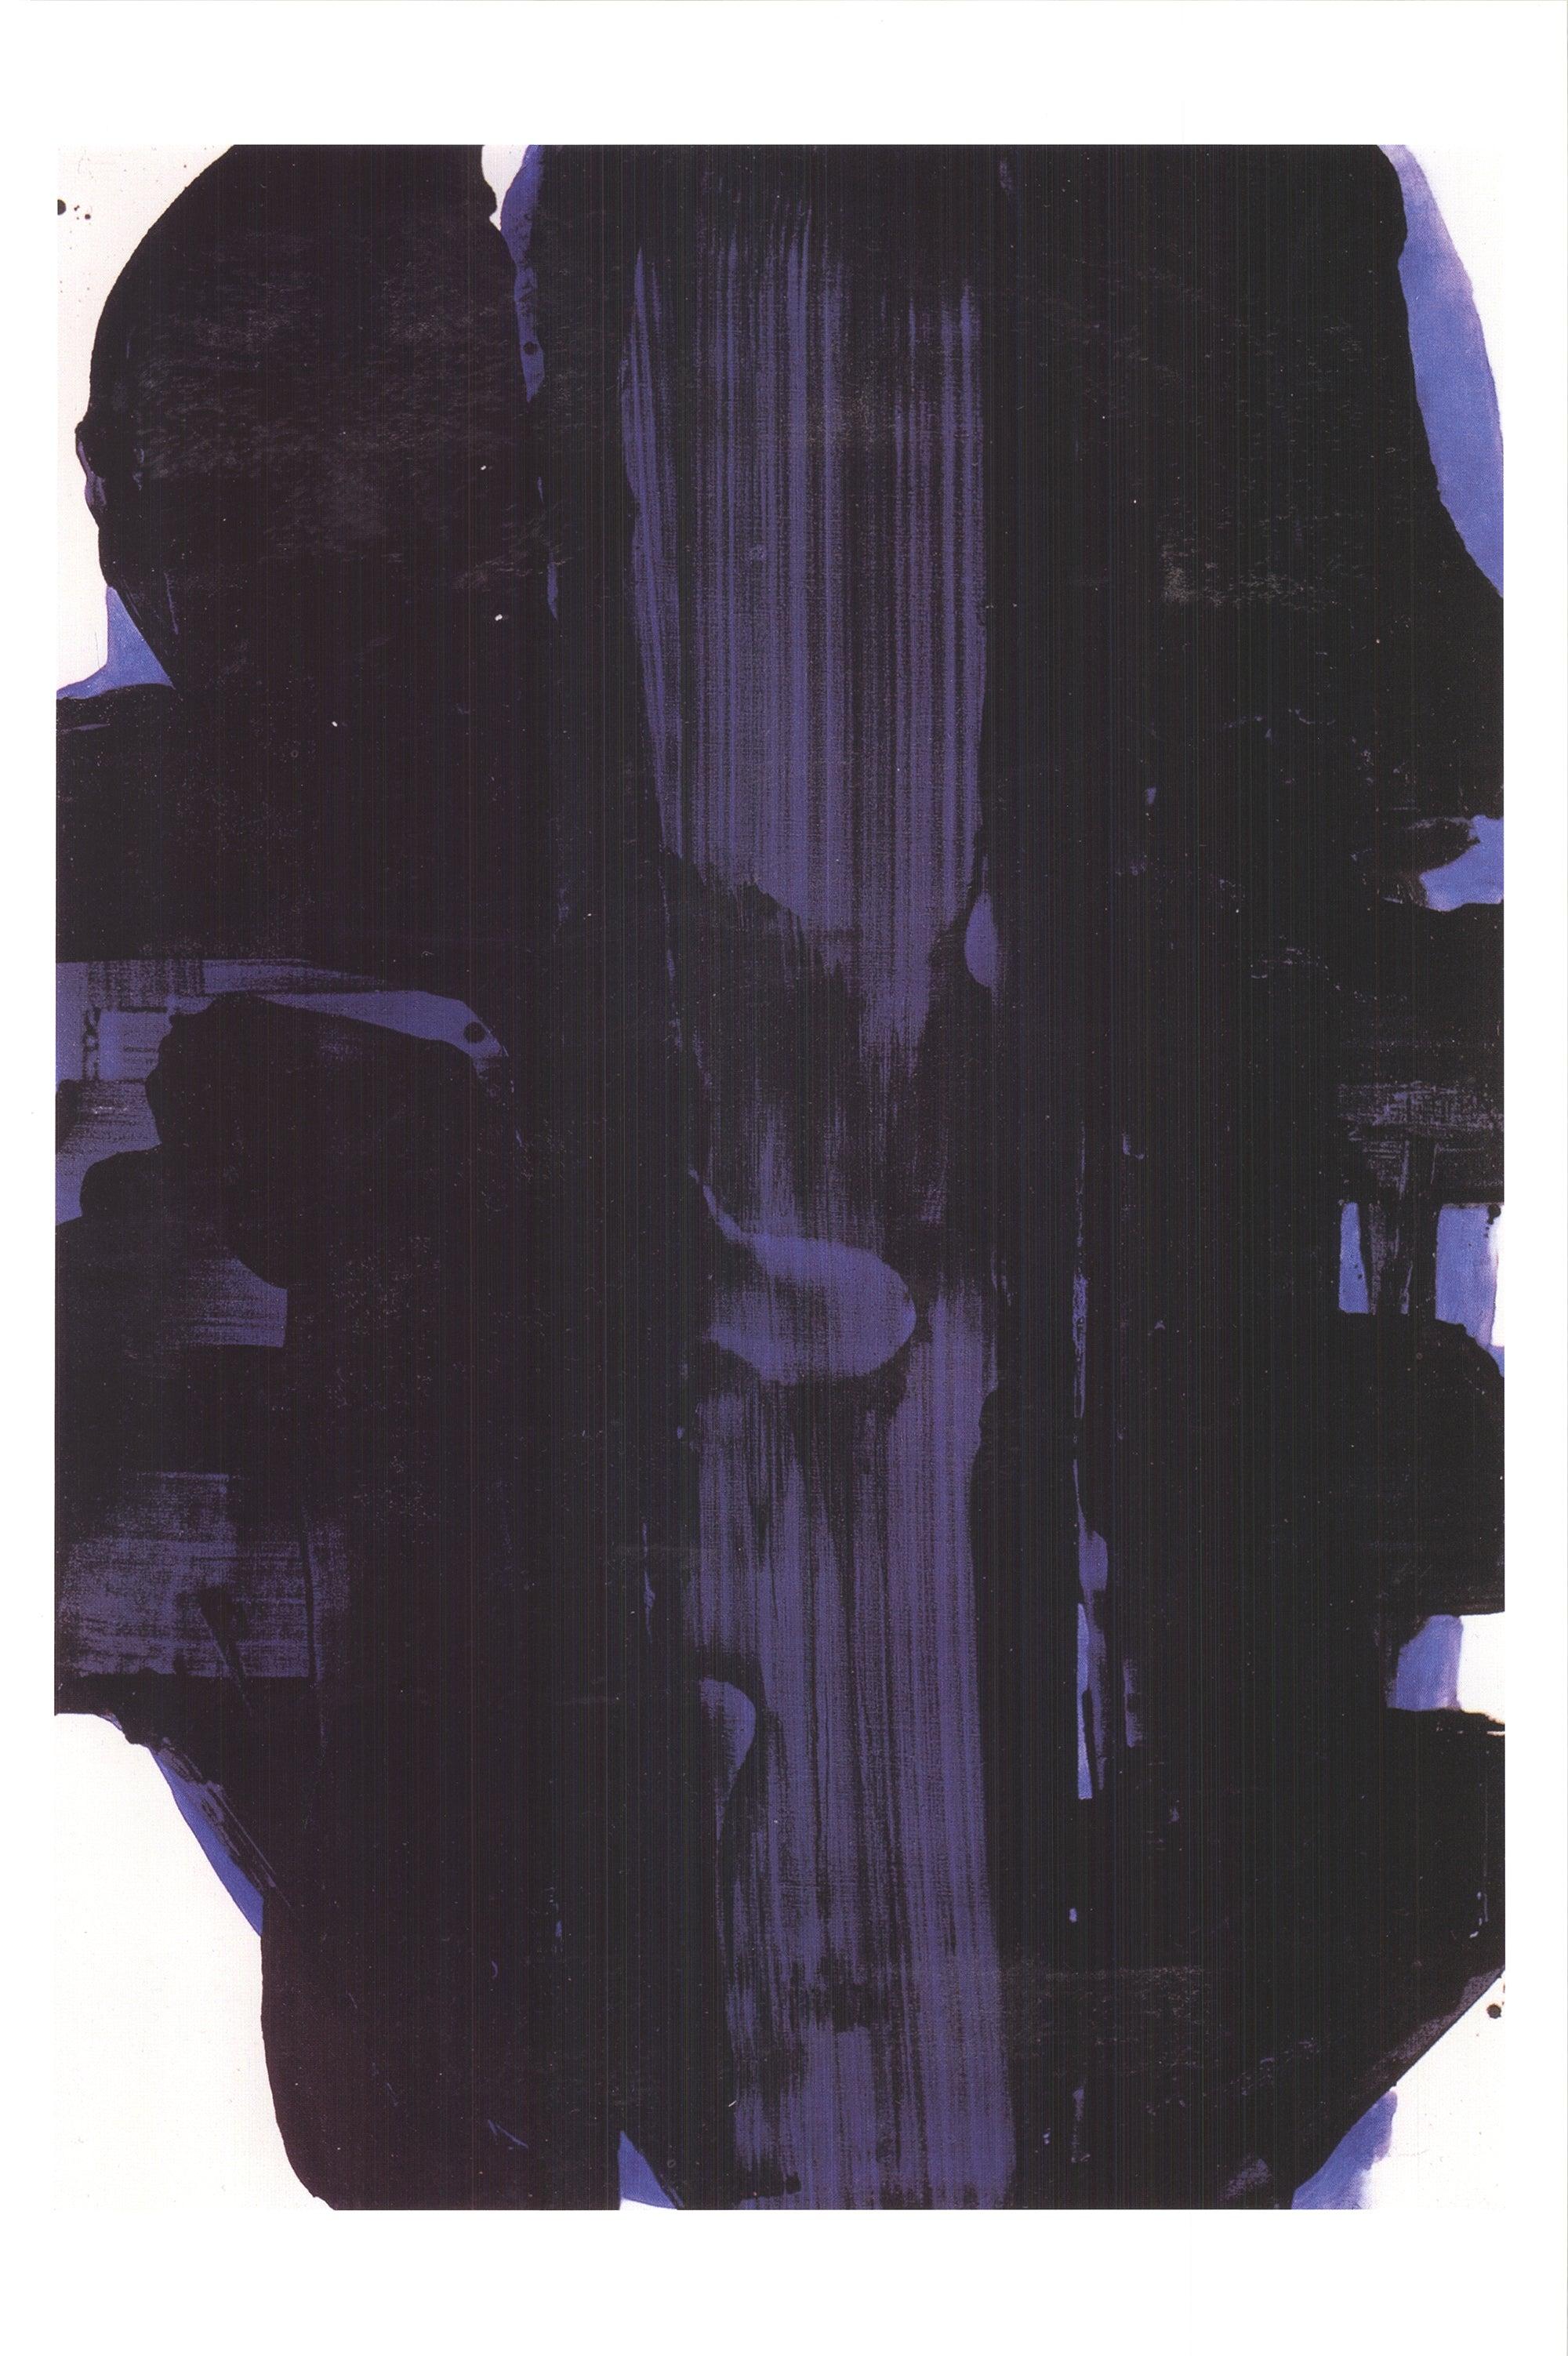 Pierre Soulages 'Painting November 30, 1967' 